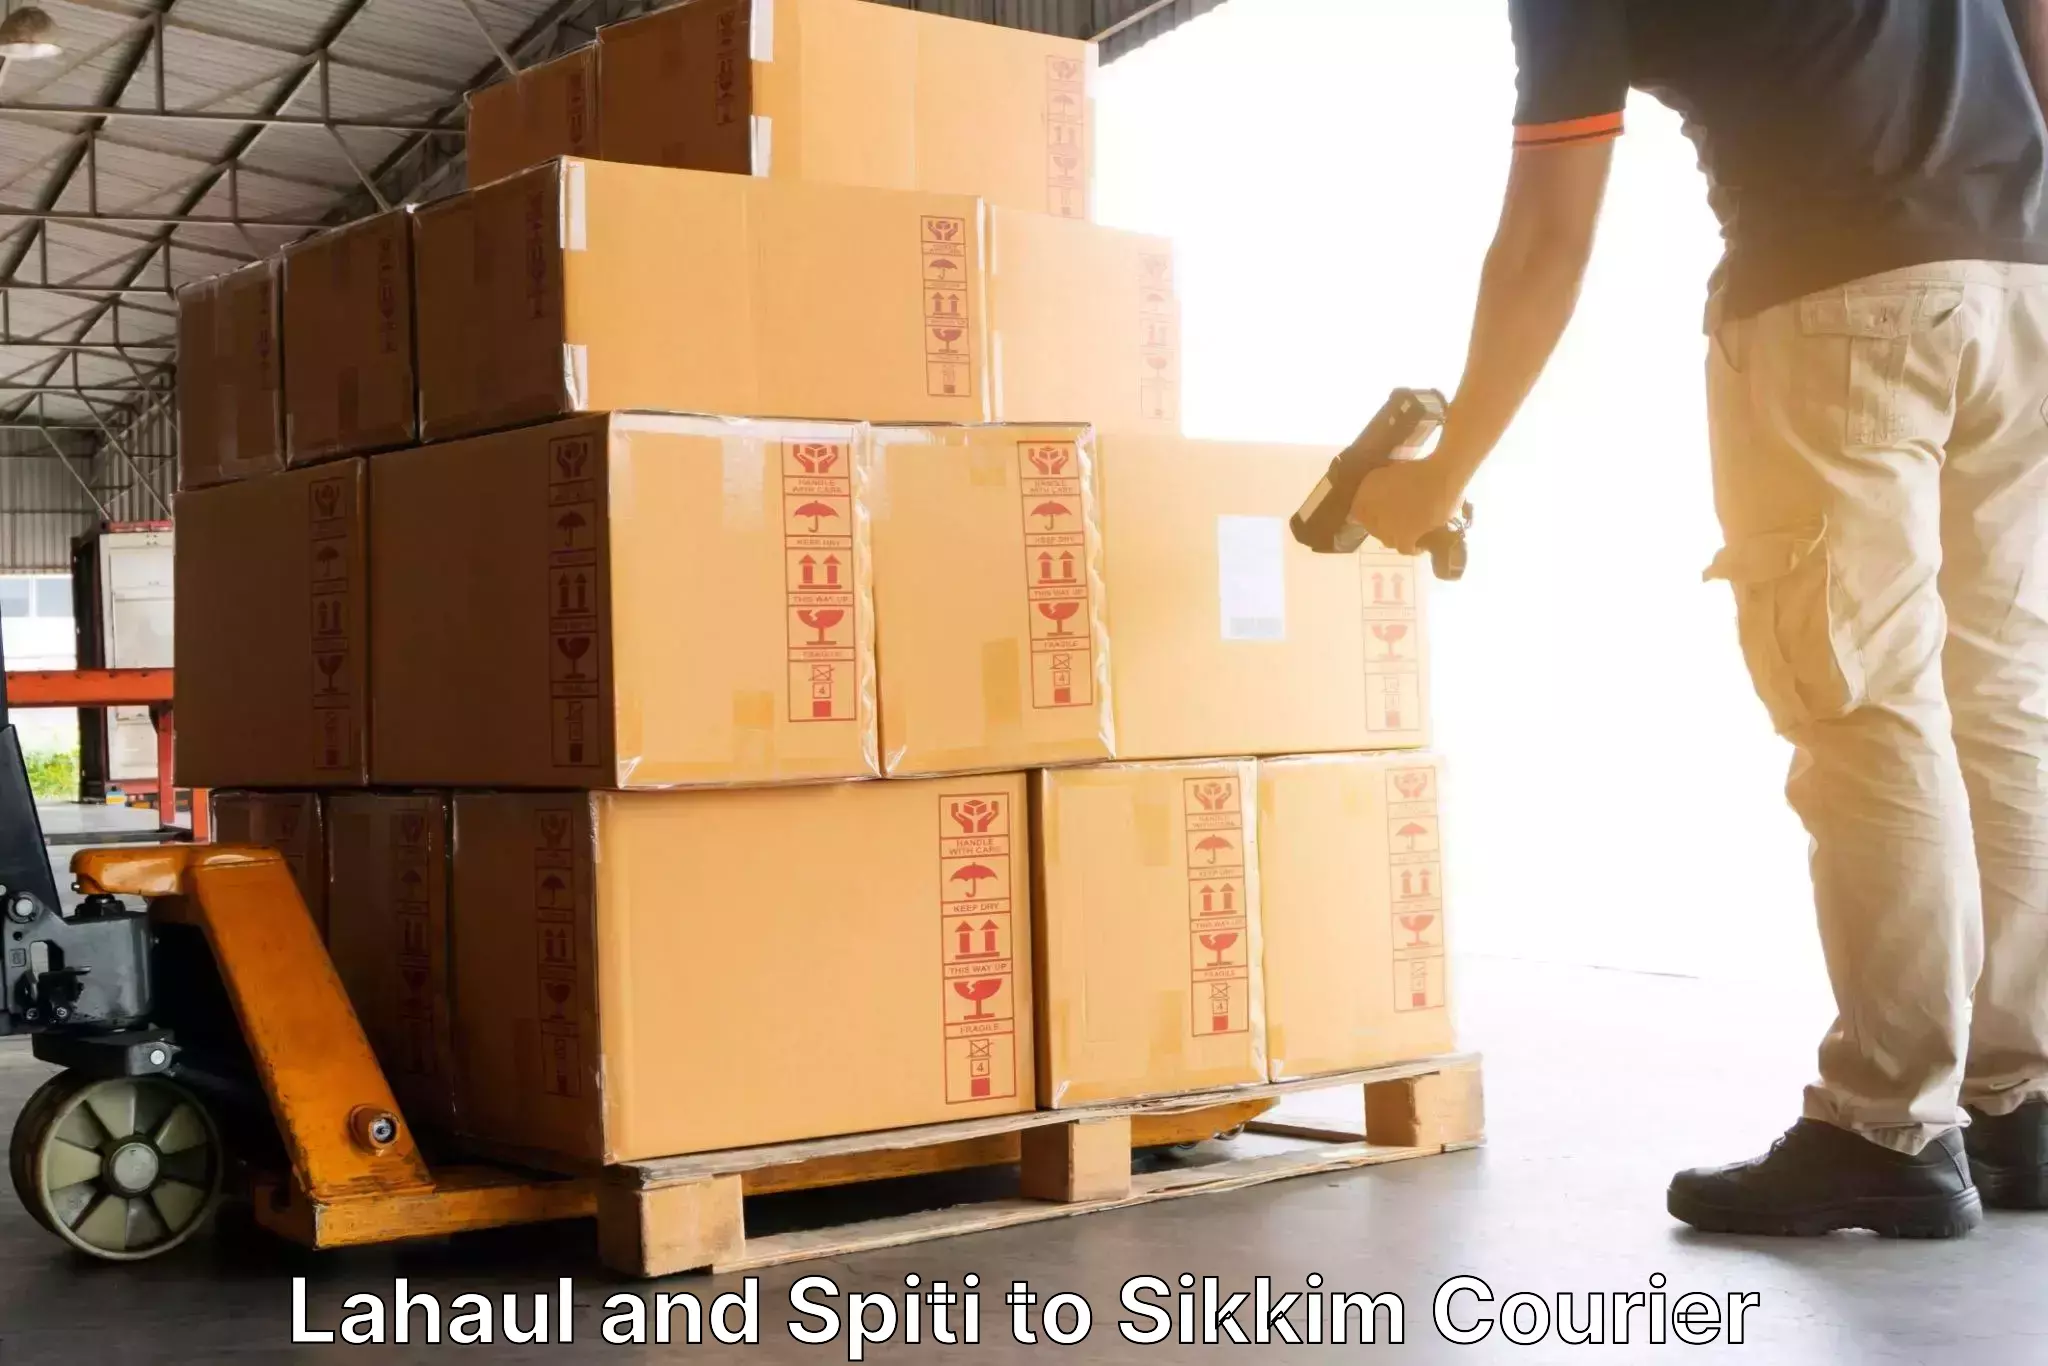 Reliable courier service Lahaul and Spiti to Sikkim